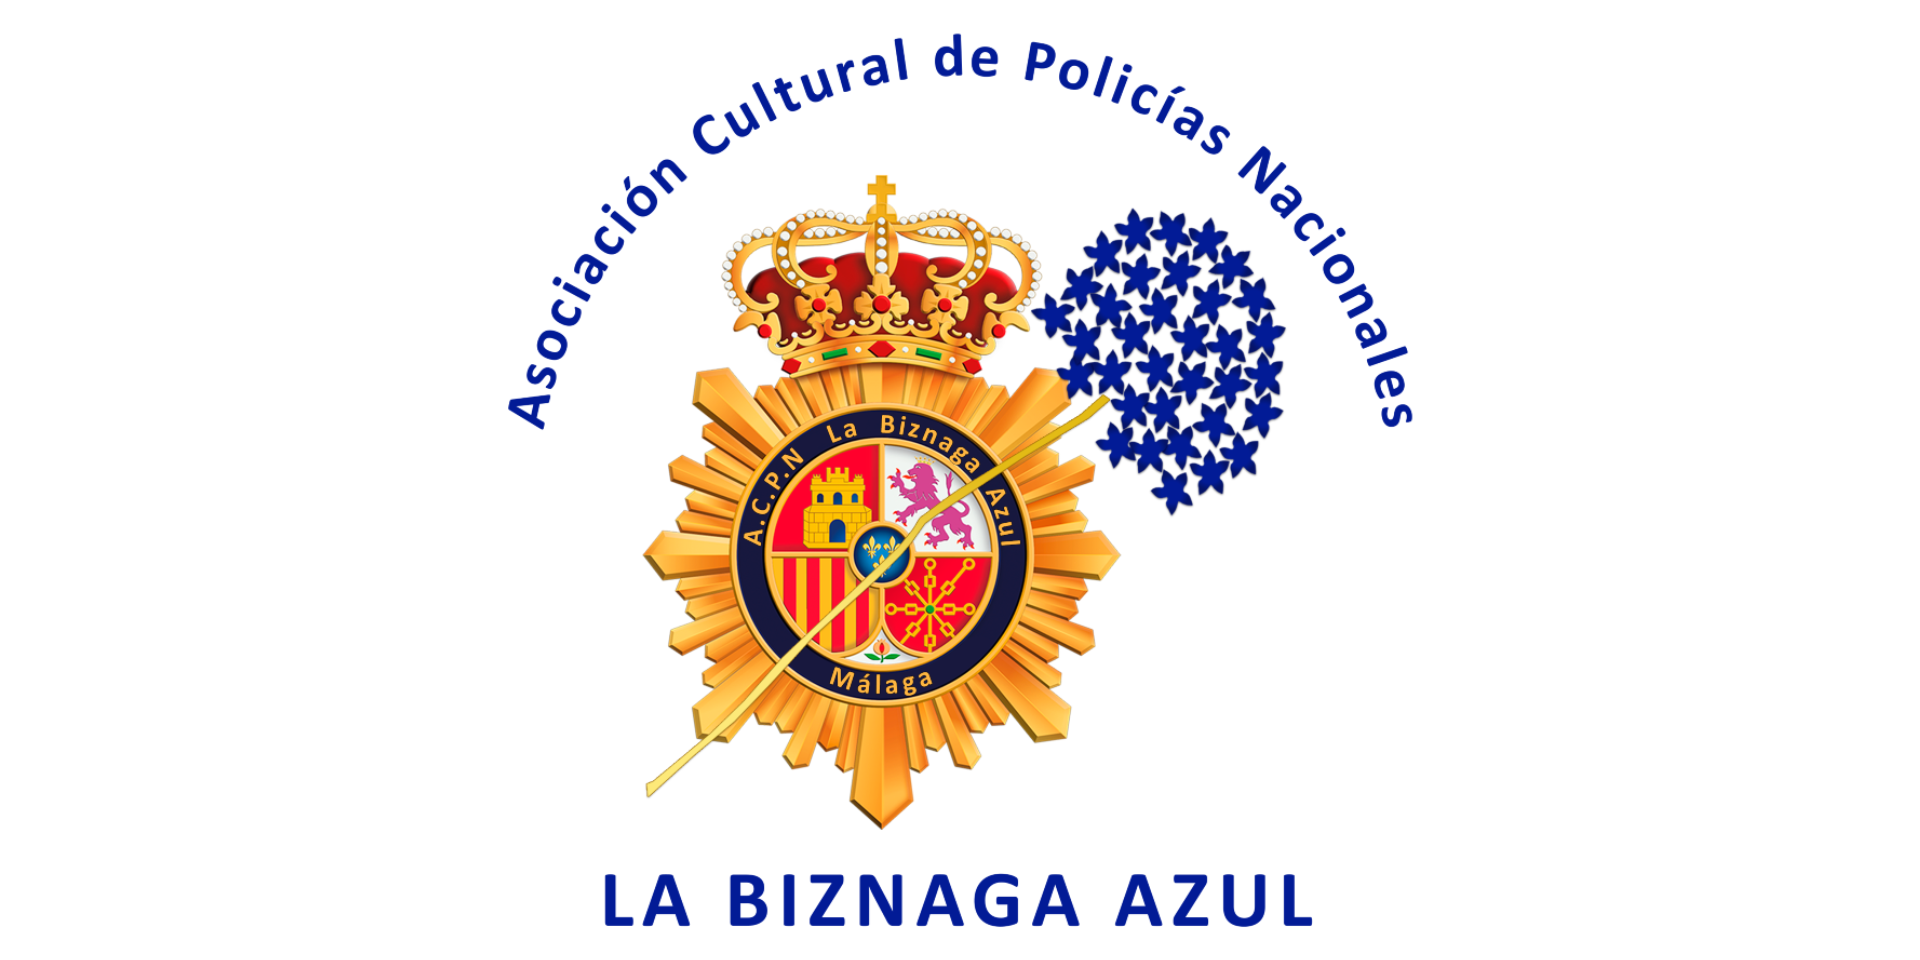 Conference 'NATIONAL POLICE, 200 YEARS OF HISTORY' by Salvador Jiménez Morales and Isaac Pacheco Suárez